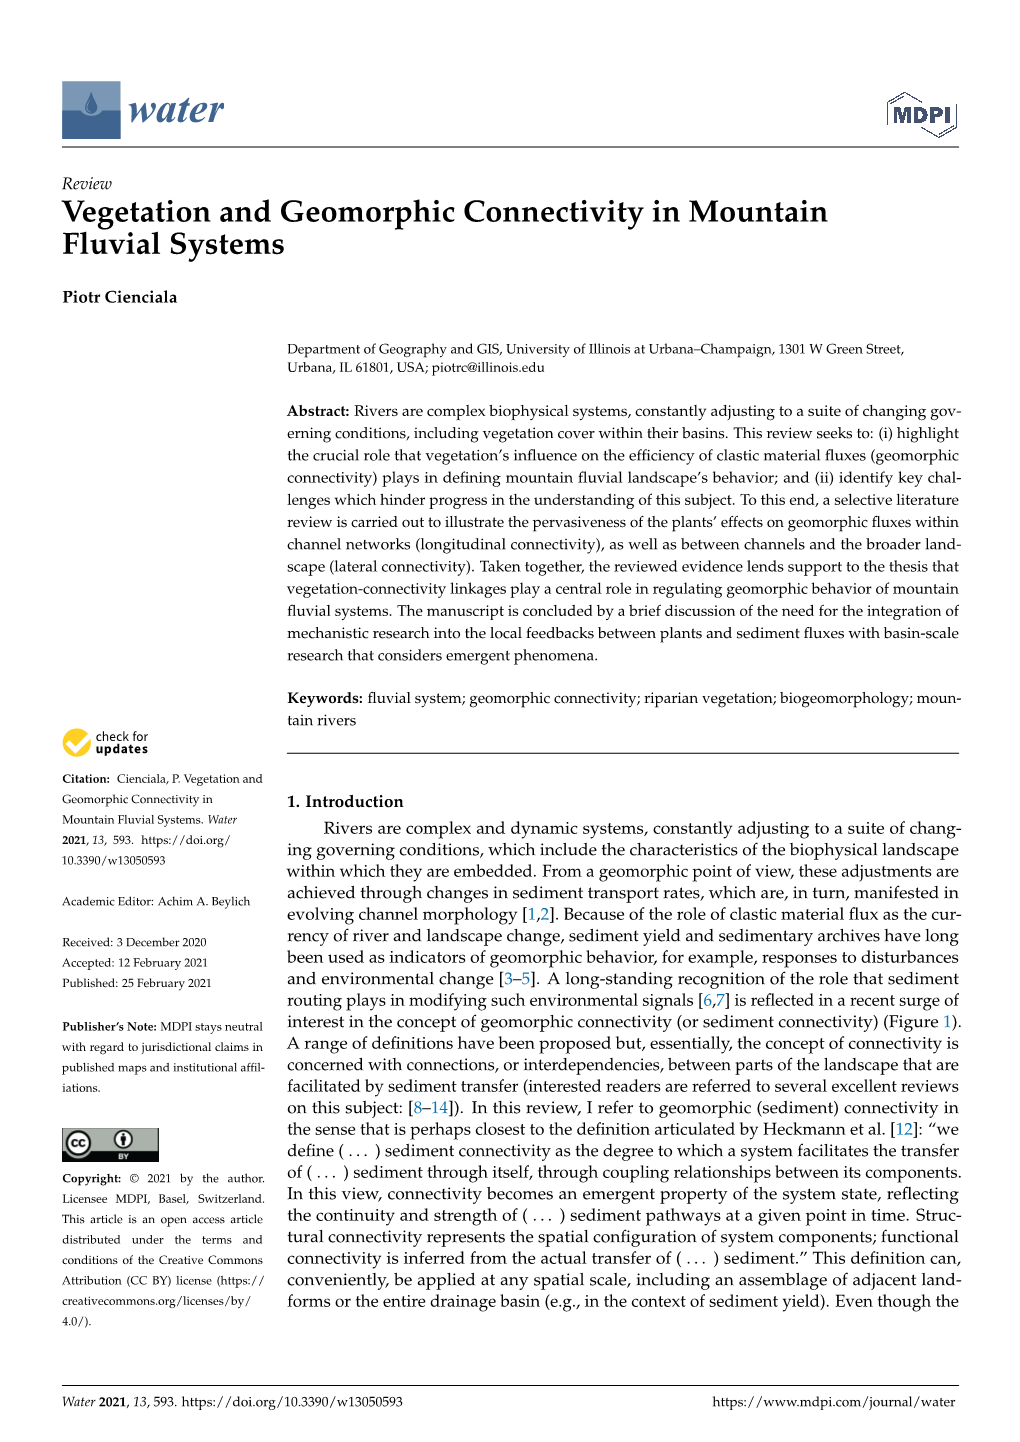 Vegetation and Geomorphic Connectivity in Mountain Fluvial Systems